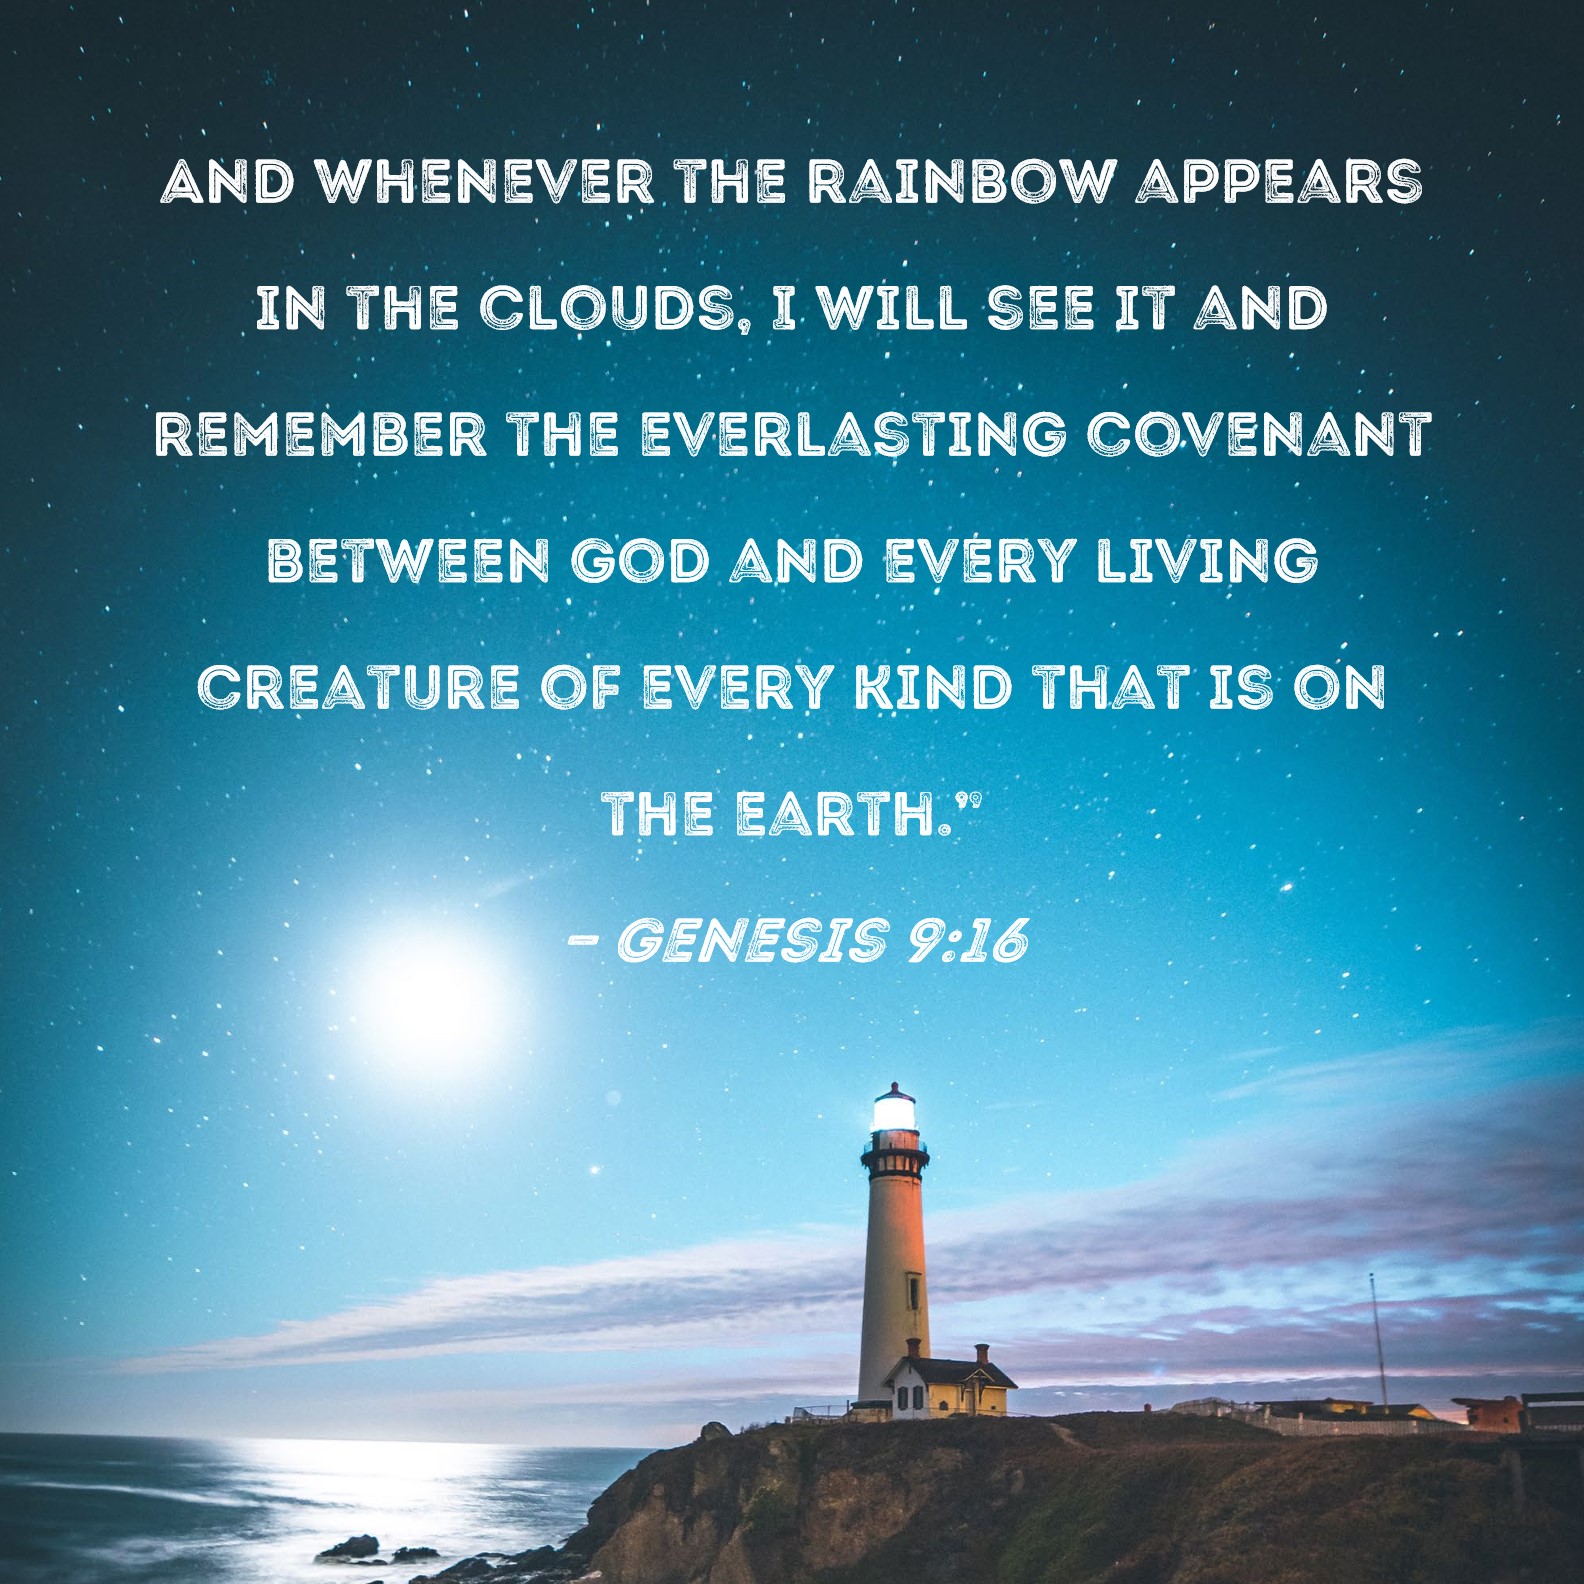 Genesis 9:16 And whenever the rainbow appears in the clouds, I will see it  and remember the everlasting covenant between God and every living creature  of every kind that is on the